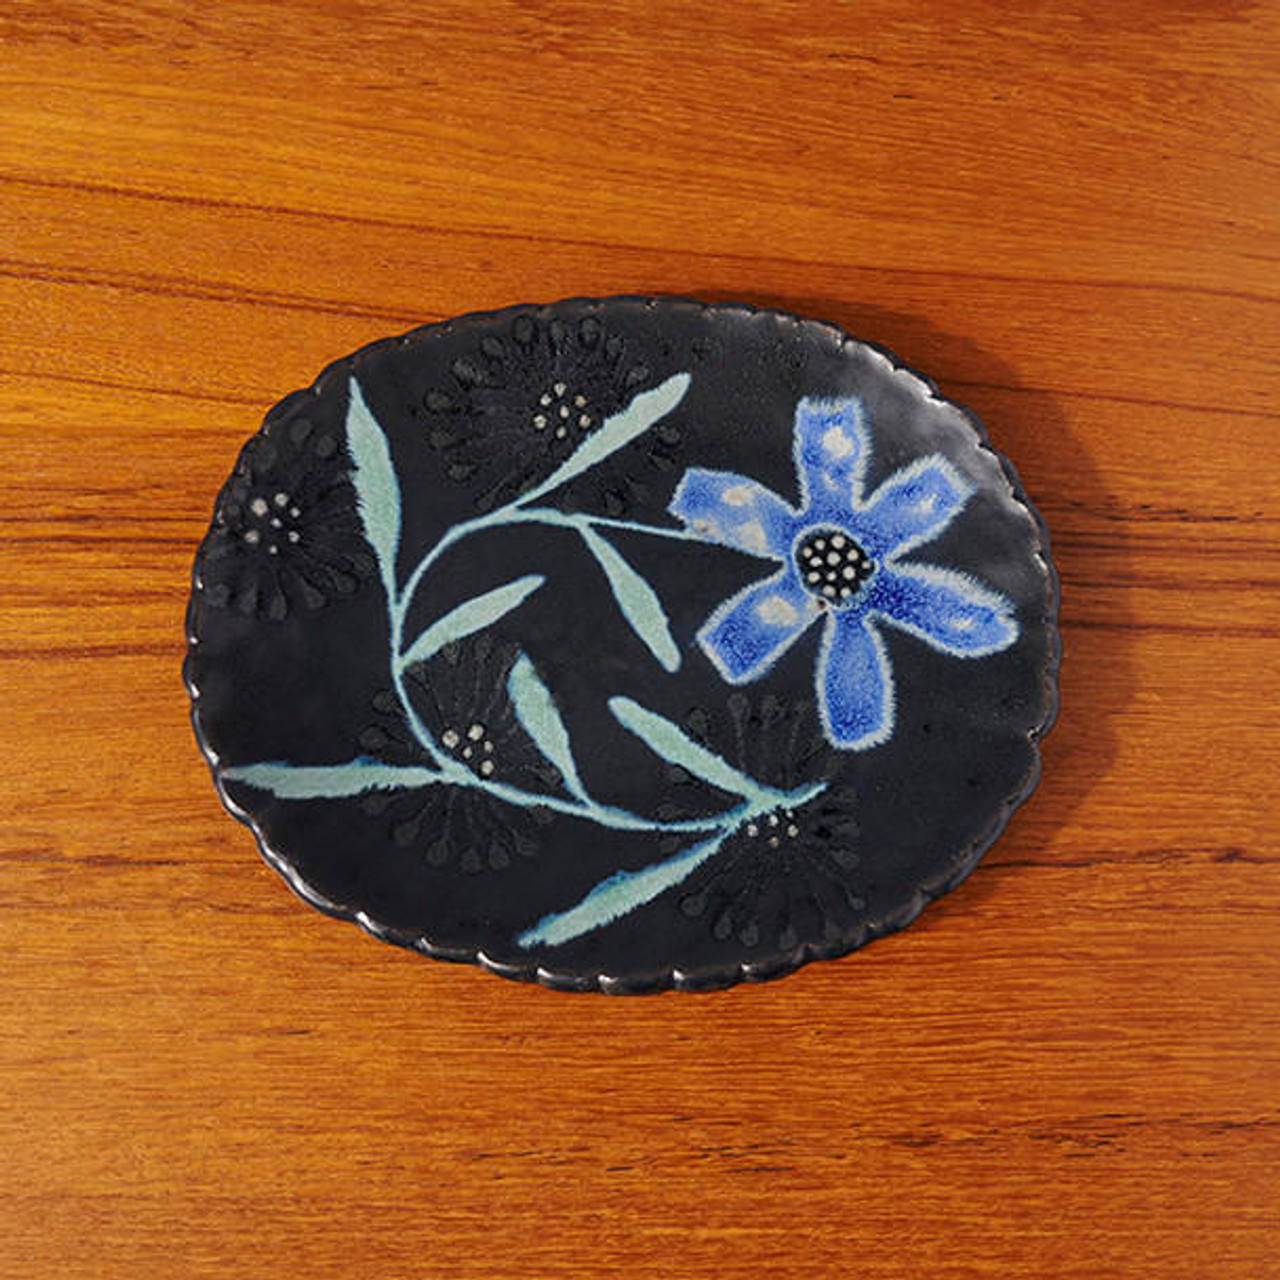 https://cdn11.bigcommerce.com/s-3rl2qg0z2p/images/stencil/1280x1280/products/13227/38178/ruth-easterbrook-blue-flower-lunch-plate-by-ruth-easterbrook__90142.1675471952.jpg?c=1